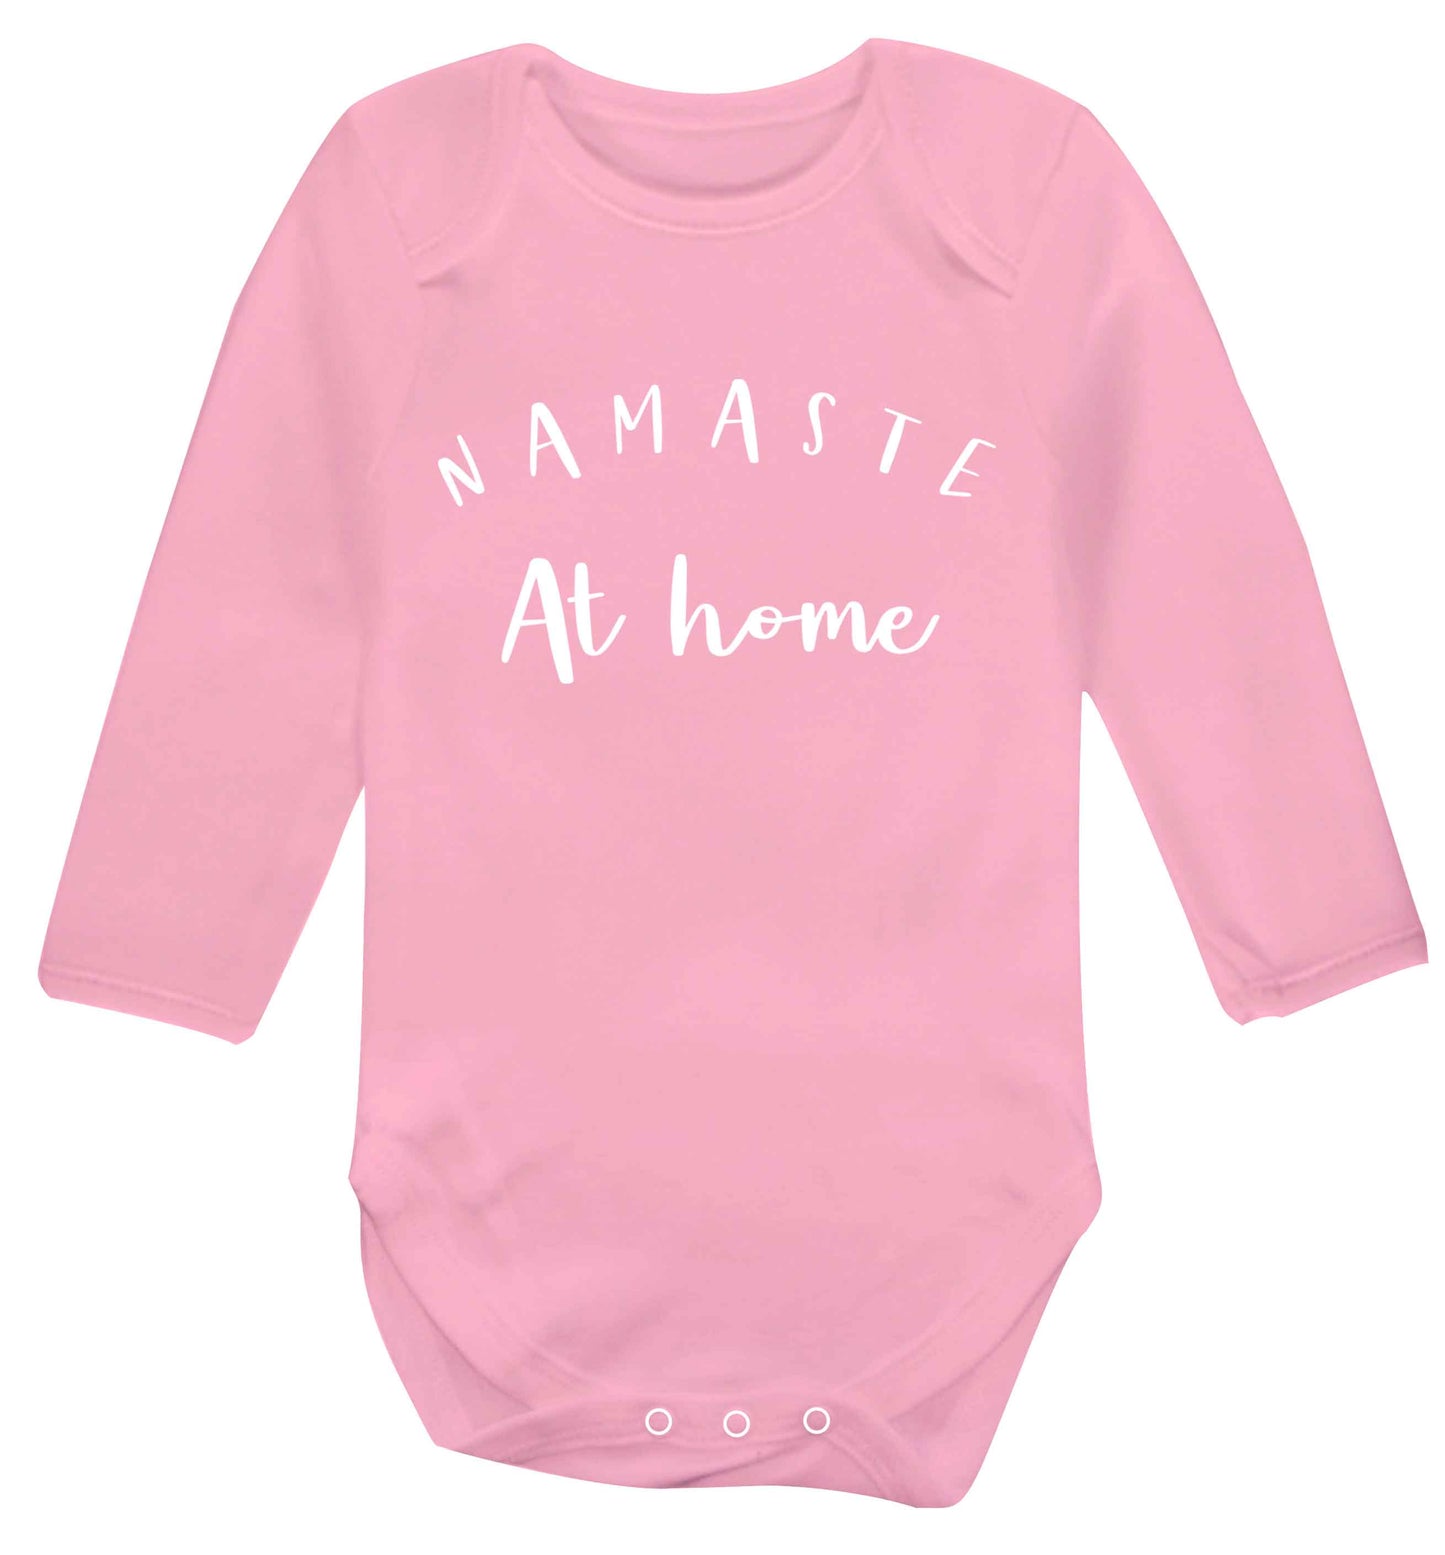 Namaste at home Baby Vest long sleeved pale pink 6-12 months